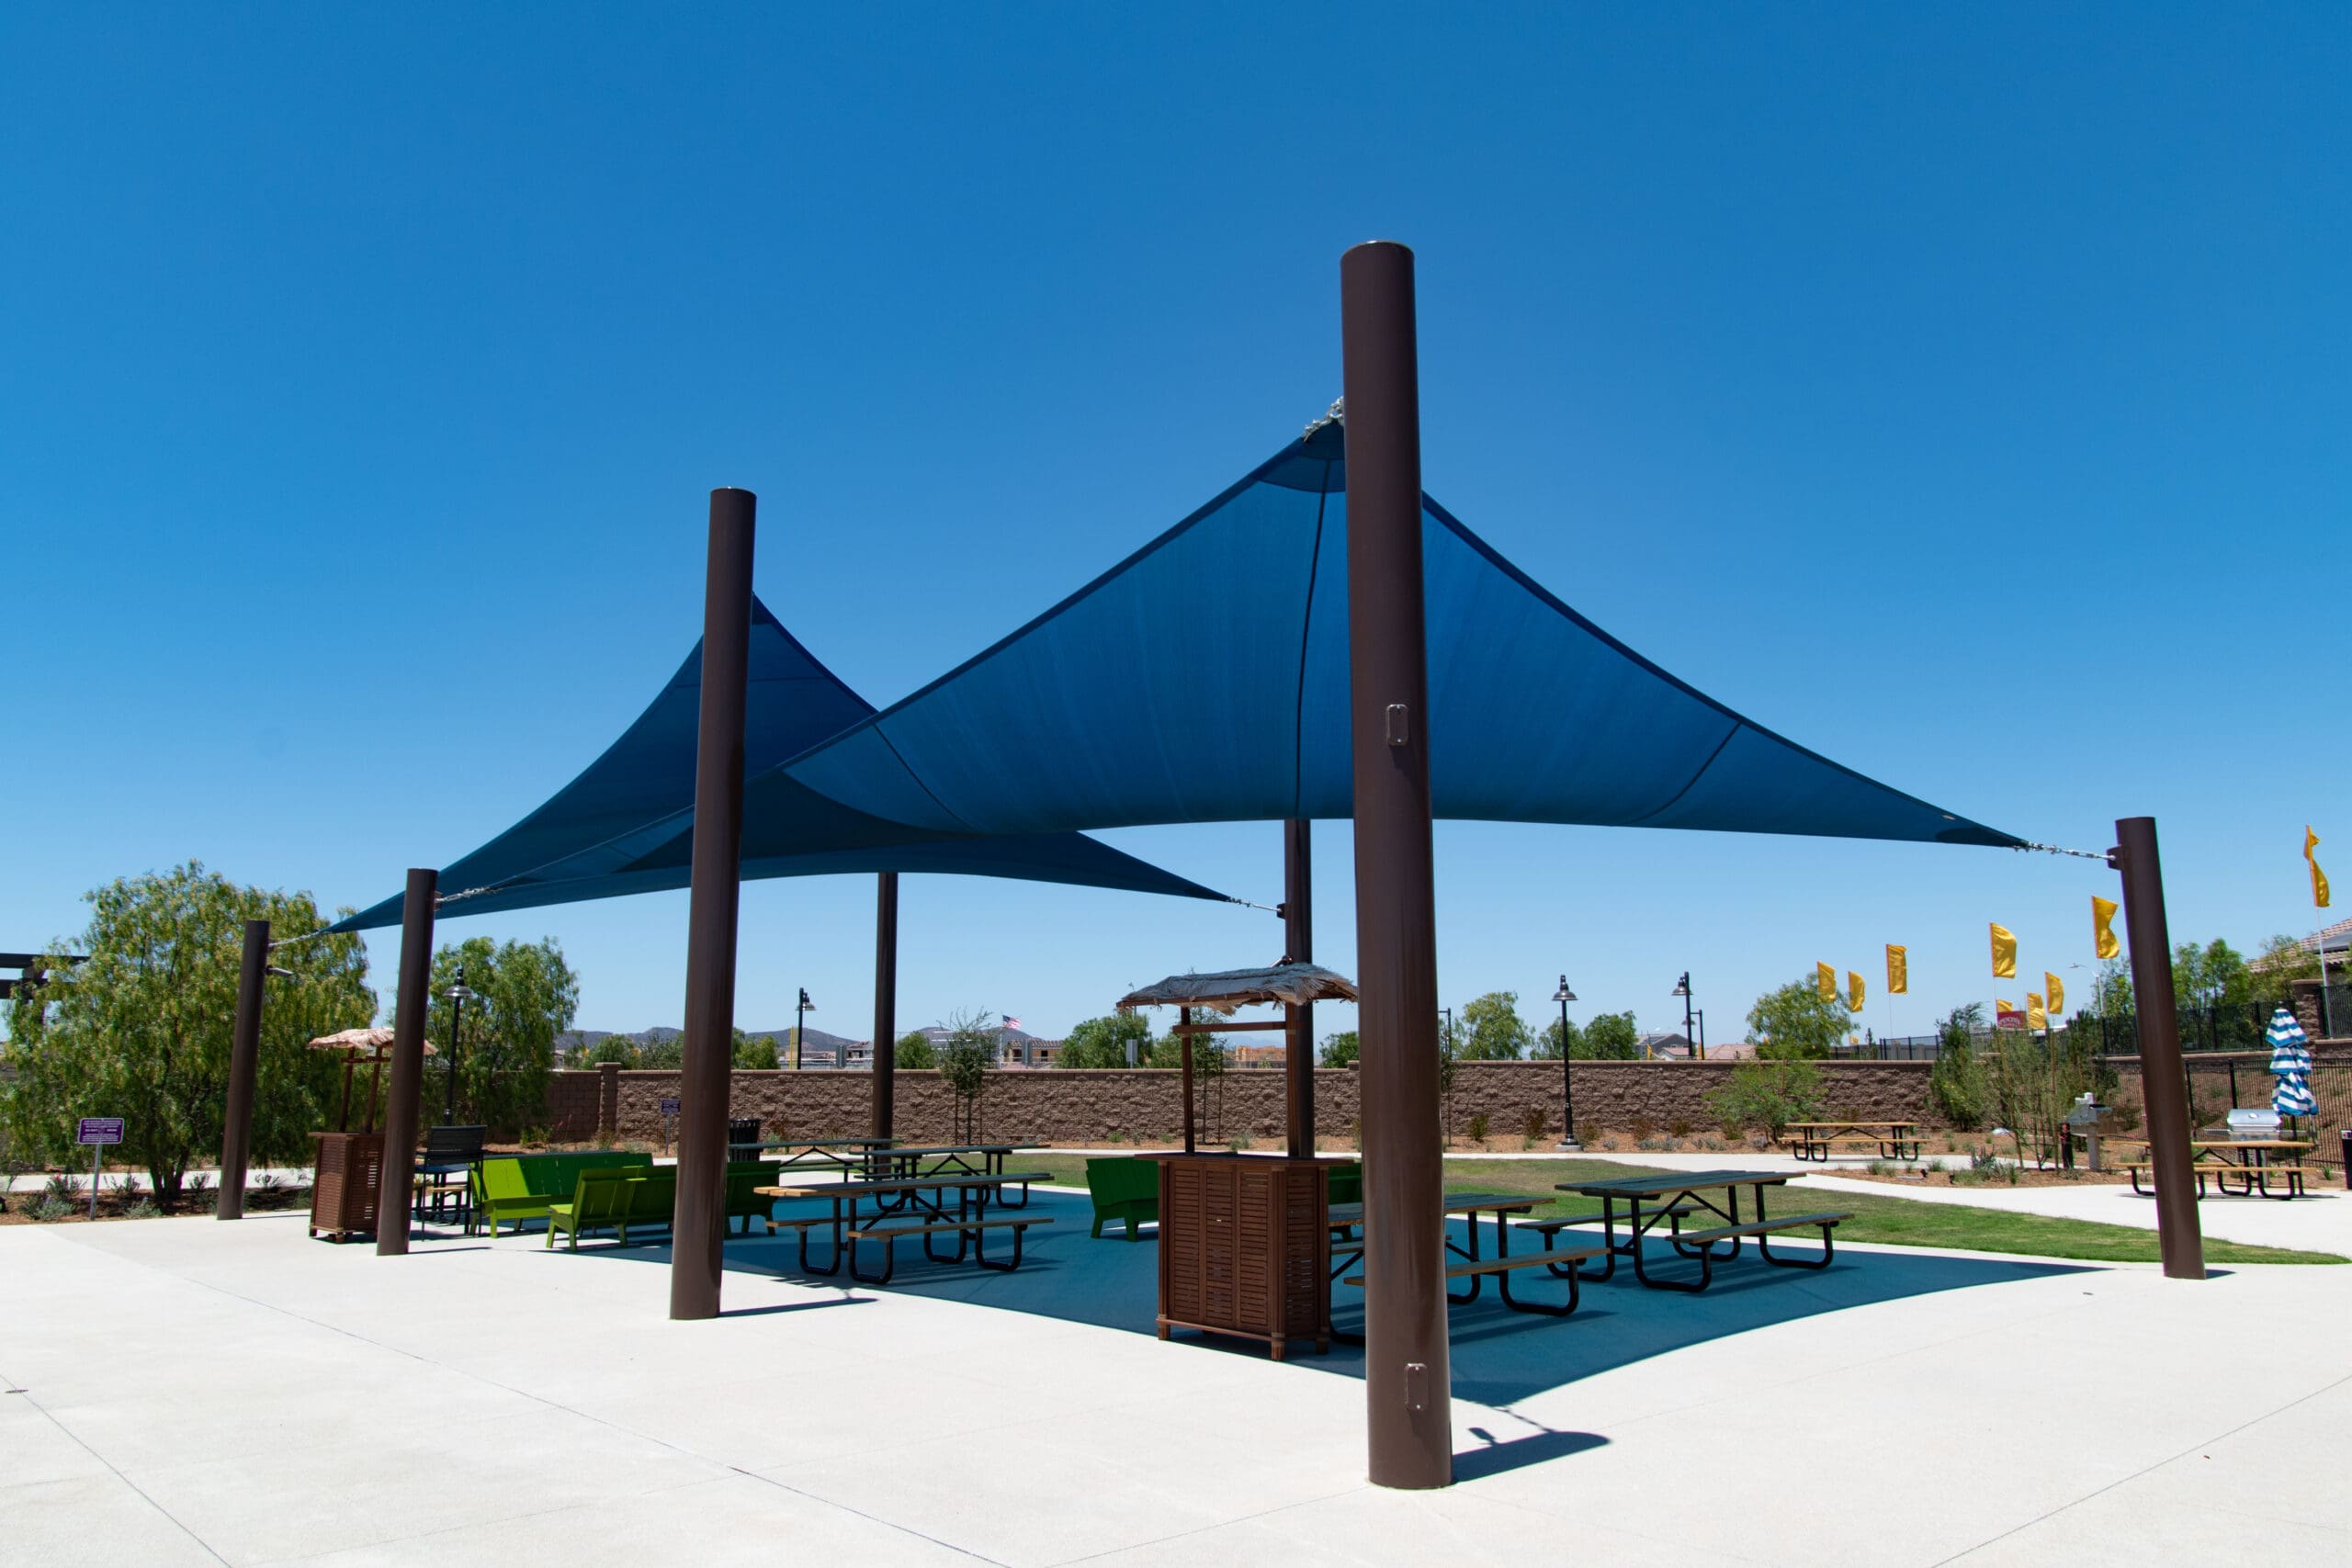 blue usa shades over outdoor park seating